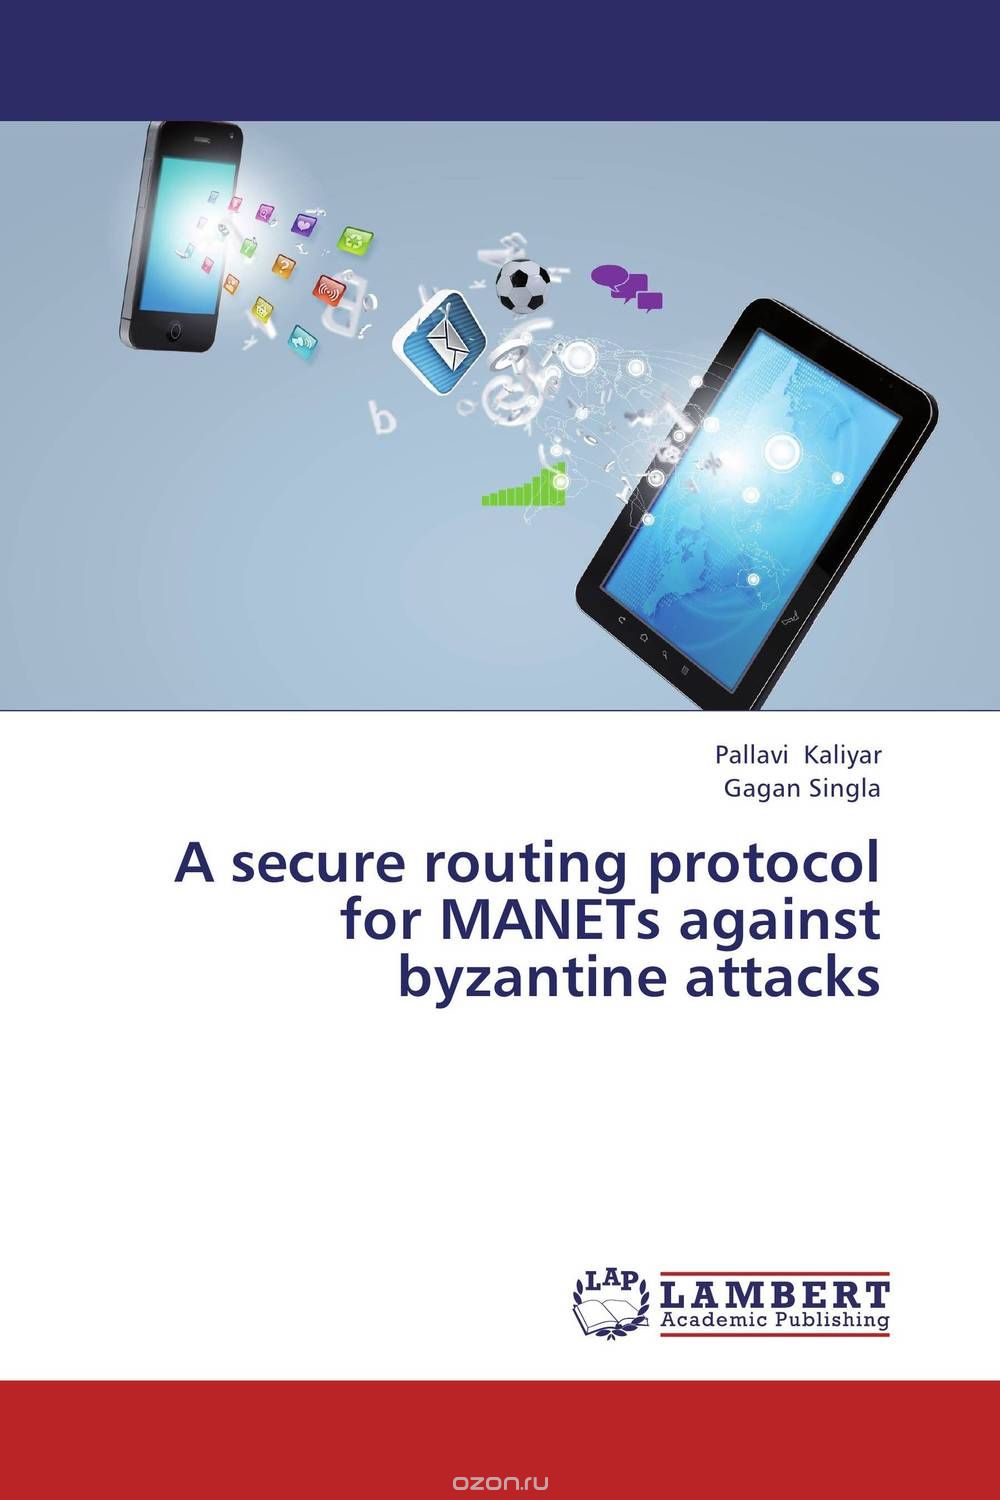 A secure routing protocol for MANETs against byzantine attacks